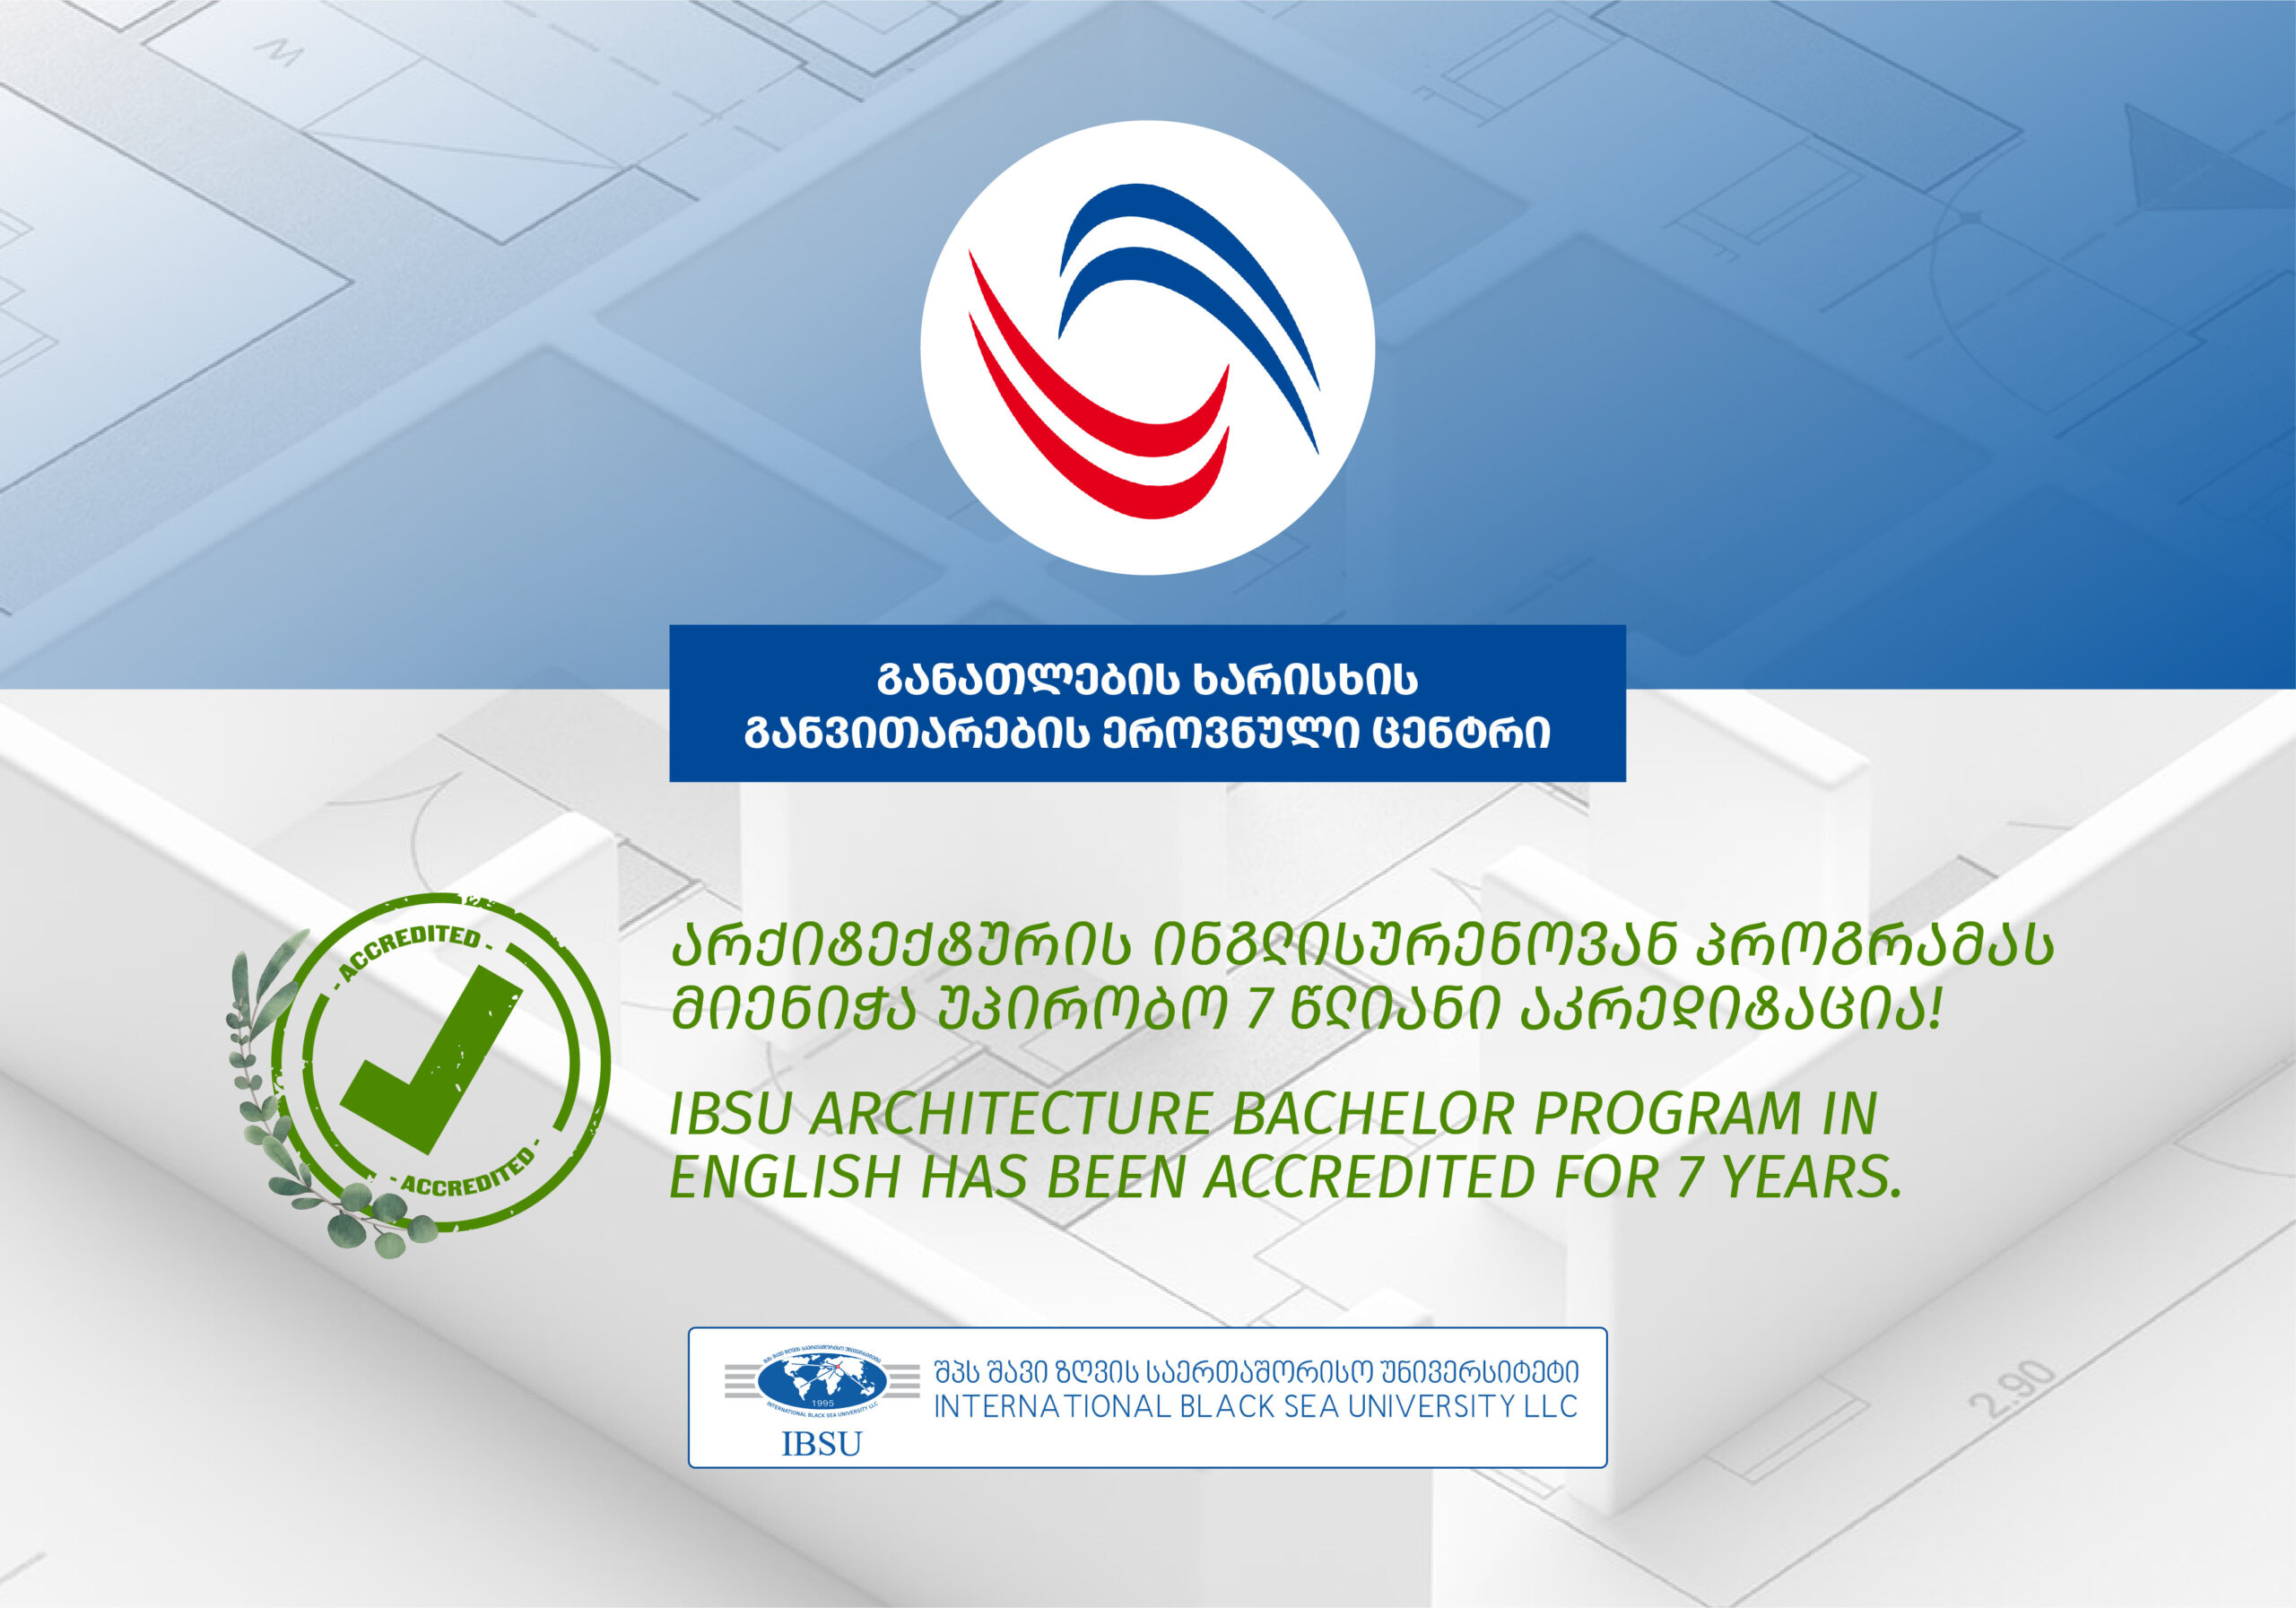 IBSU Architecture Bachelor Program in English Has been Accredited for 7 Years